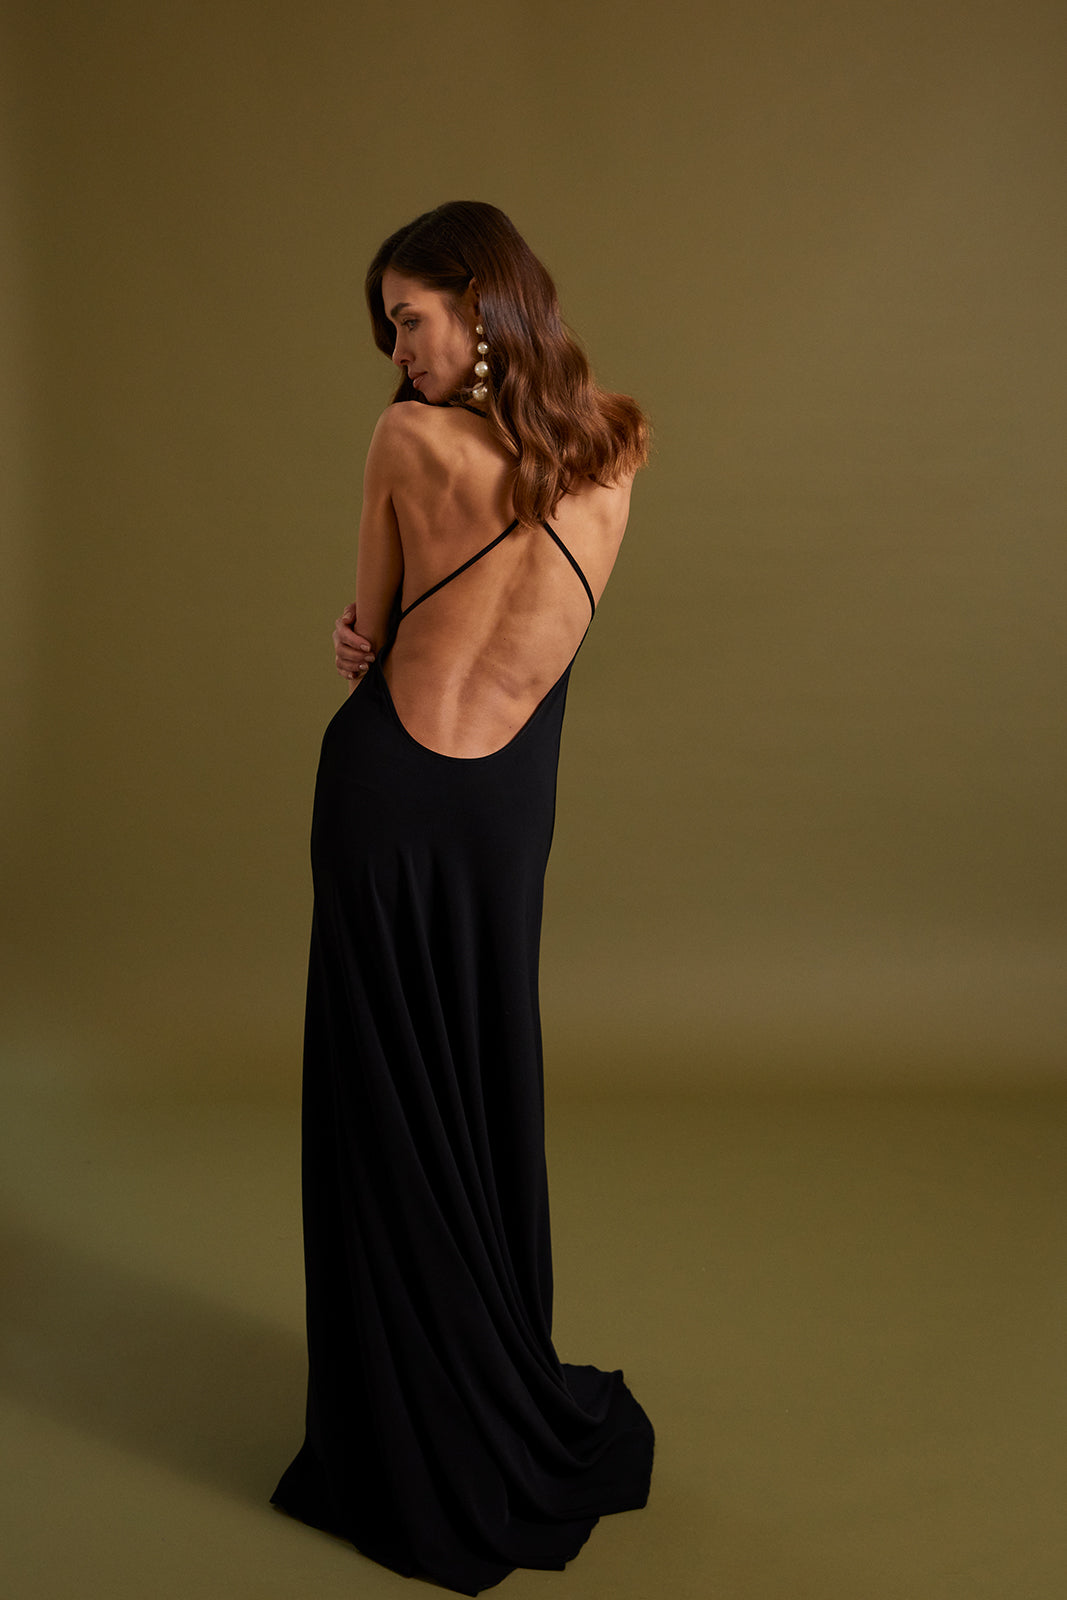 LONG BLACK DRESS WITH THIN SHOULDER STRAPS